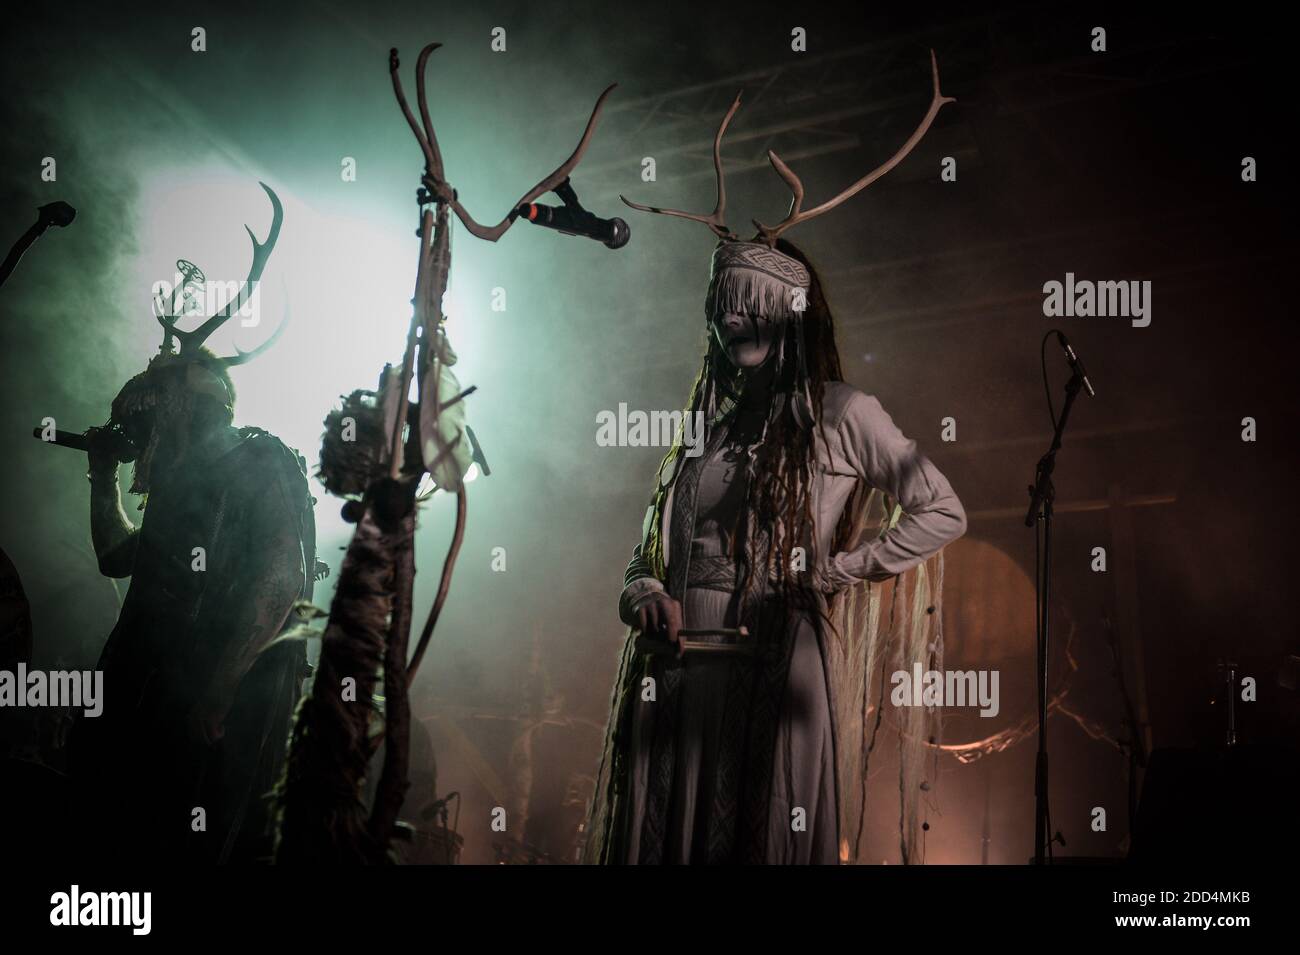 Heilung performing live on stage during Wacken Open Air Festival in Wacken, Germany on August 1, 2018. Photo by Julien Reynaud/APS-Medias/ABACAPRESS.COM Stock Photo